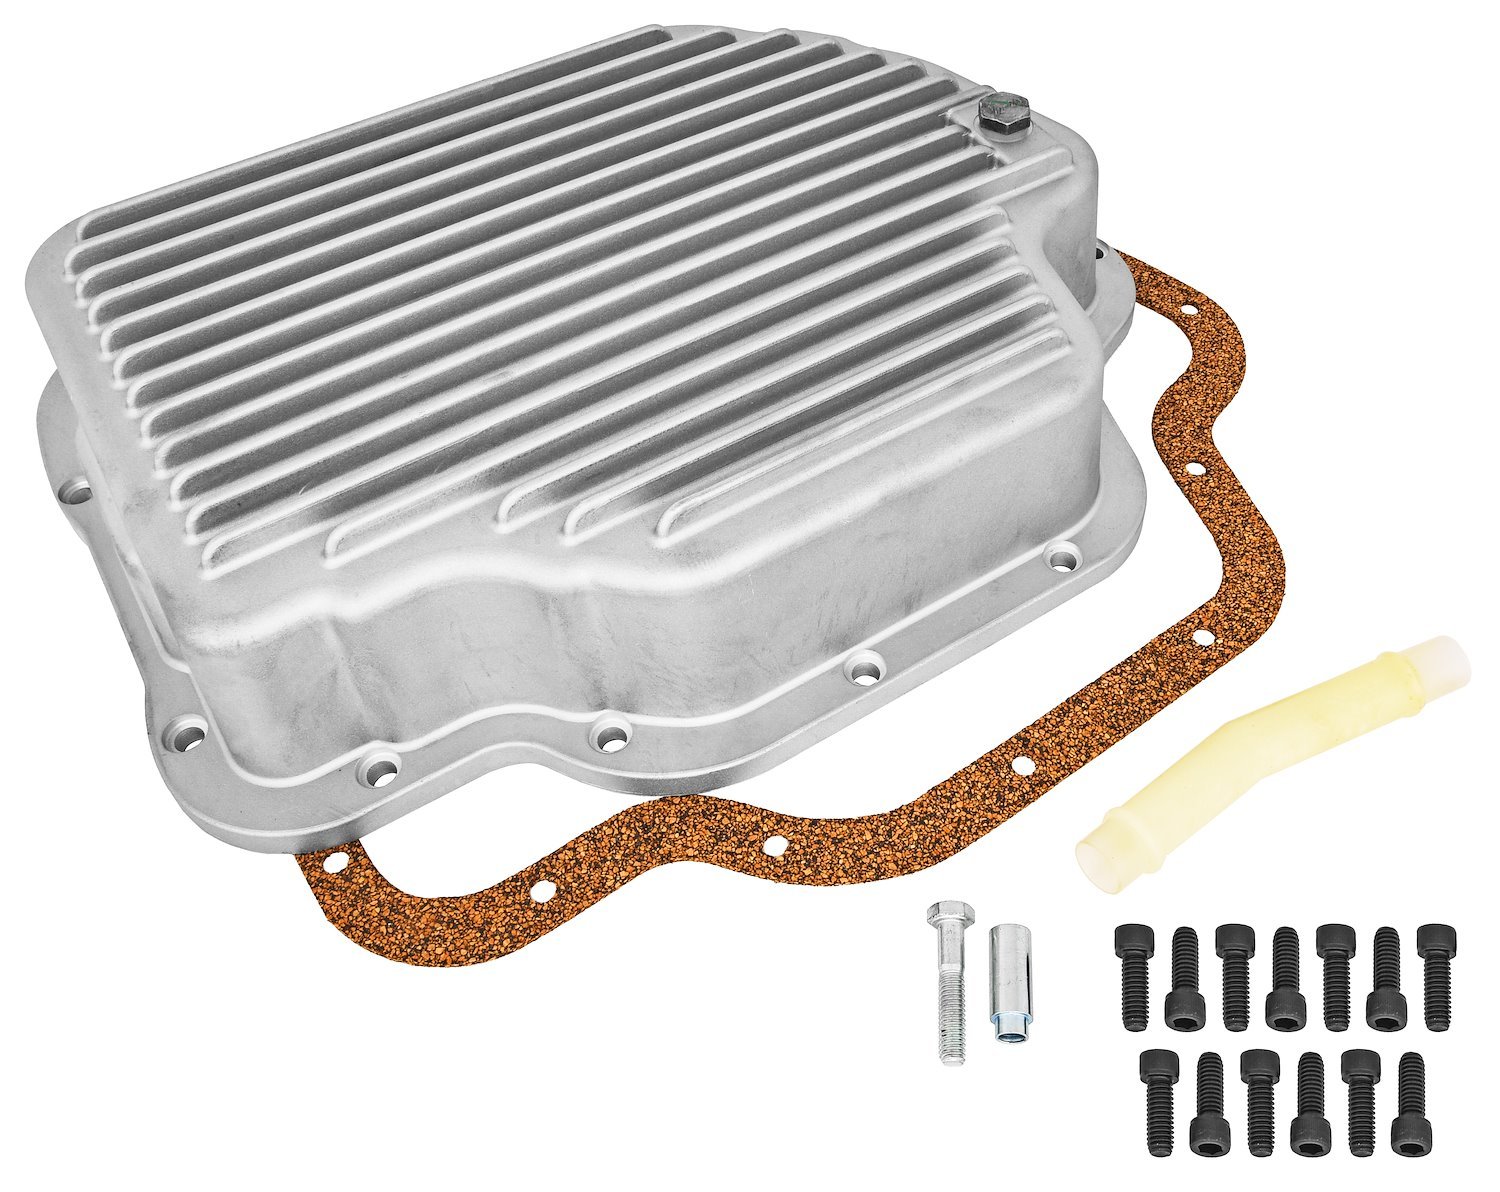 Cast Aluminum Transmission Pan for TH400 Automatic Transmission